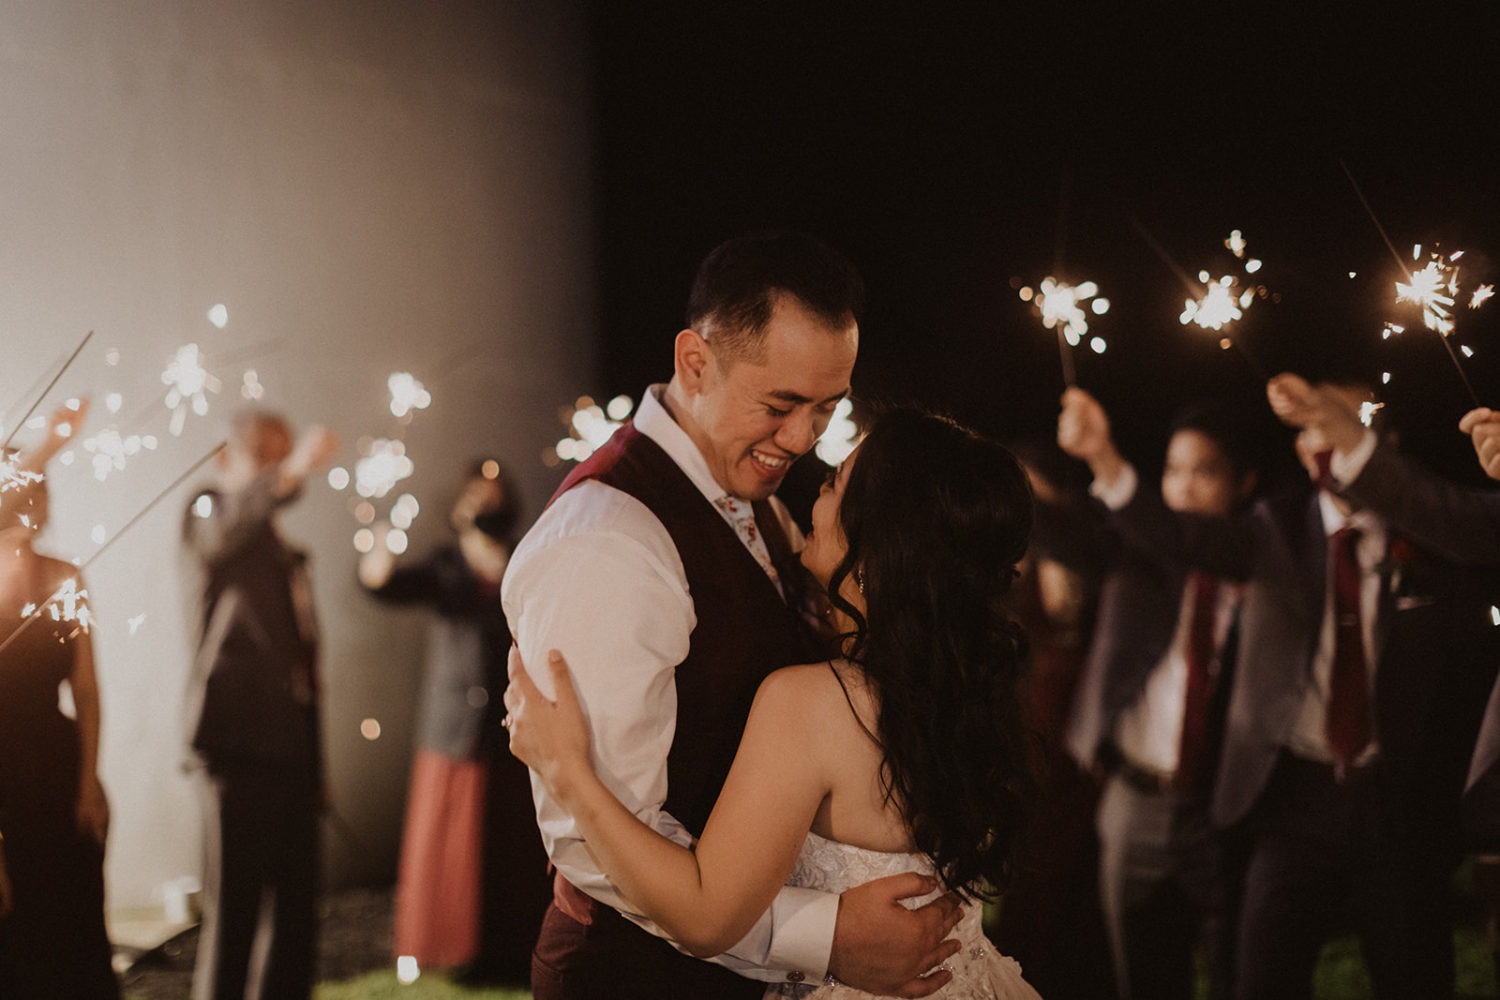 Couple embraces surrounded by sparklers at wedding exit